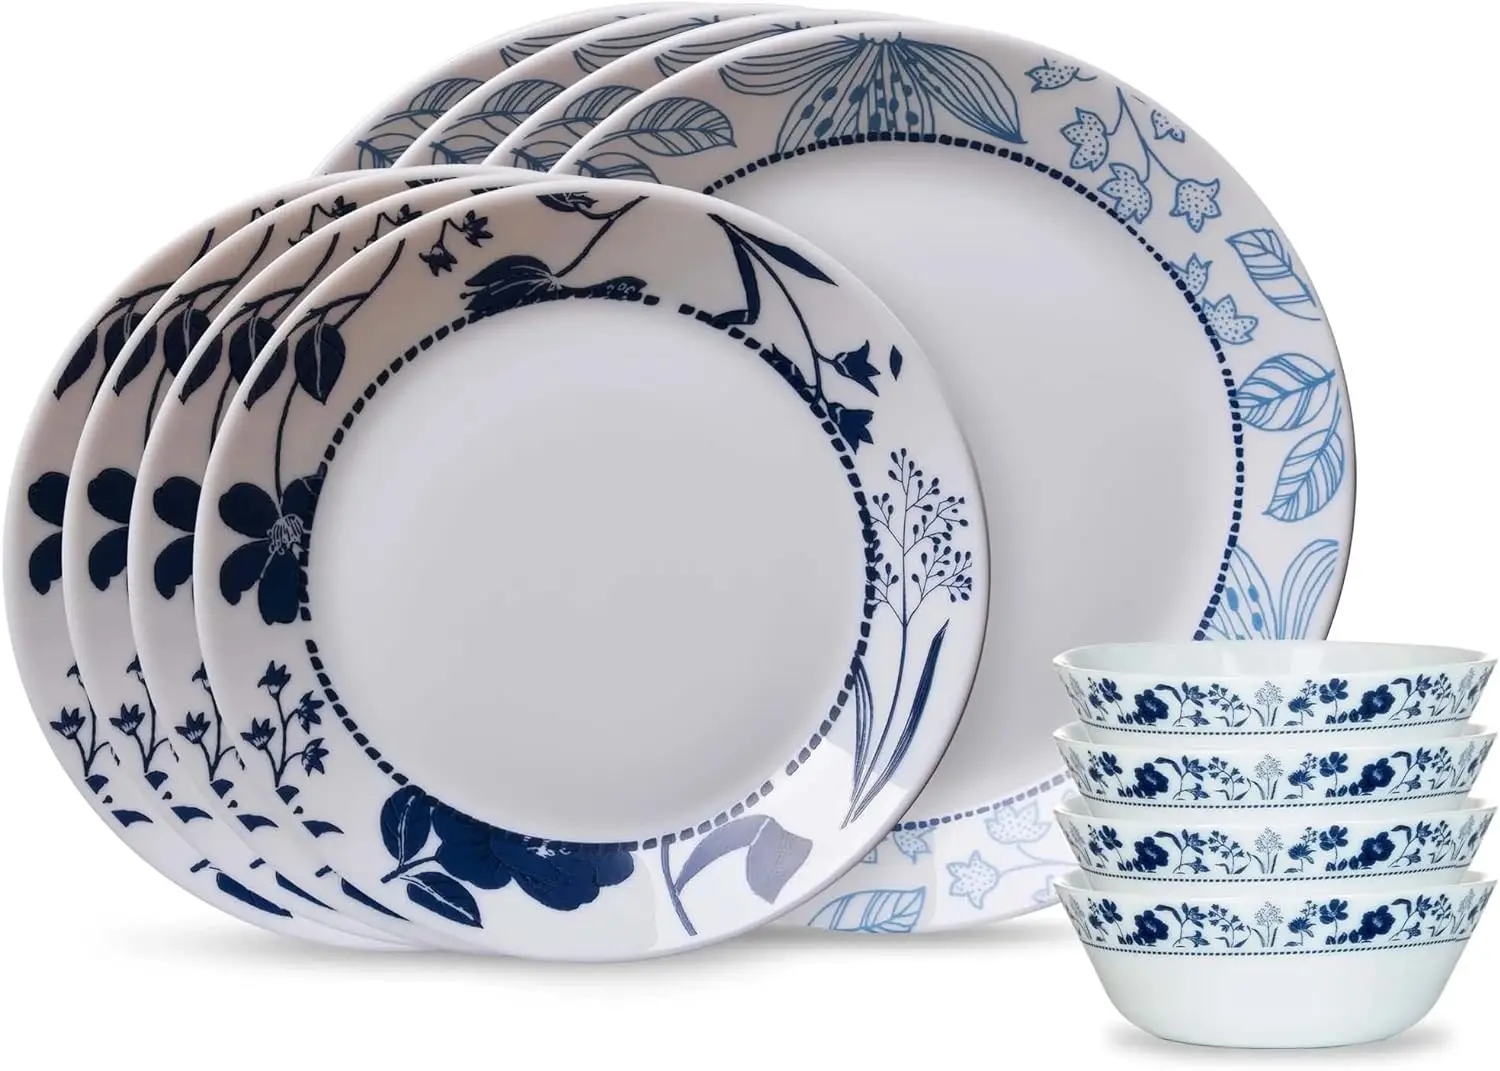 

12-Pc Dinnerware Set, Service for 4, Durable and Eco-Friendly, Higher Rim Glass Plate & Bowl Set, Microwave